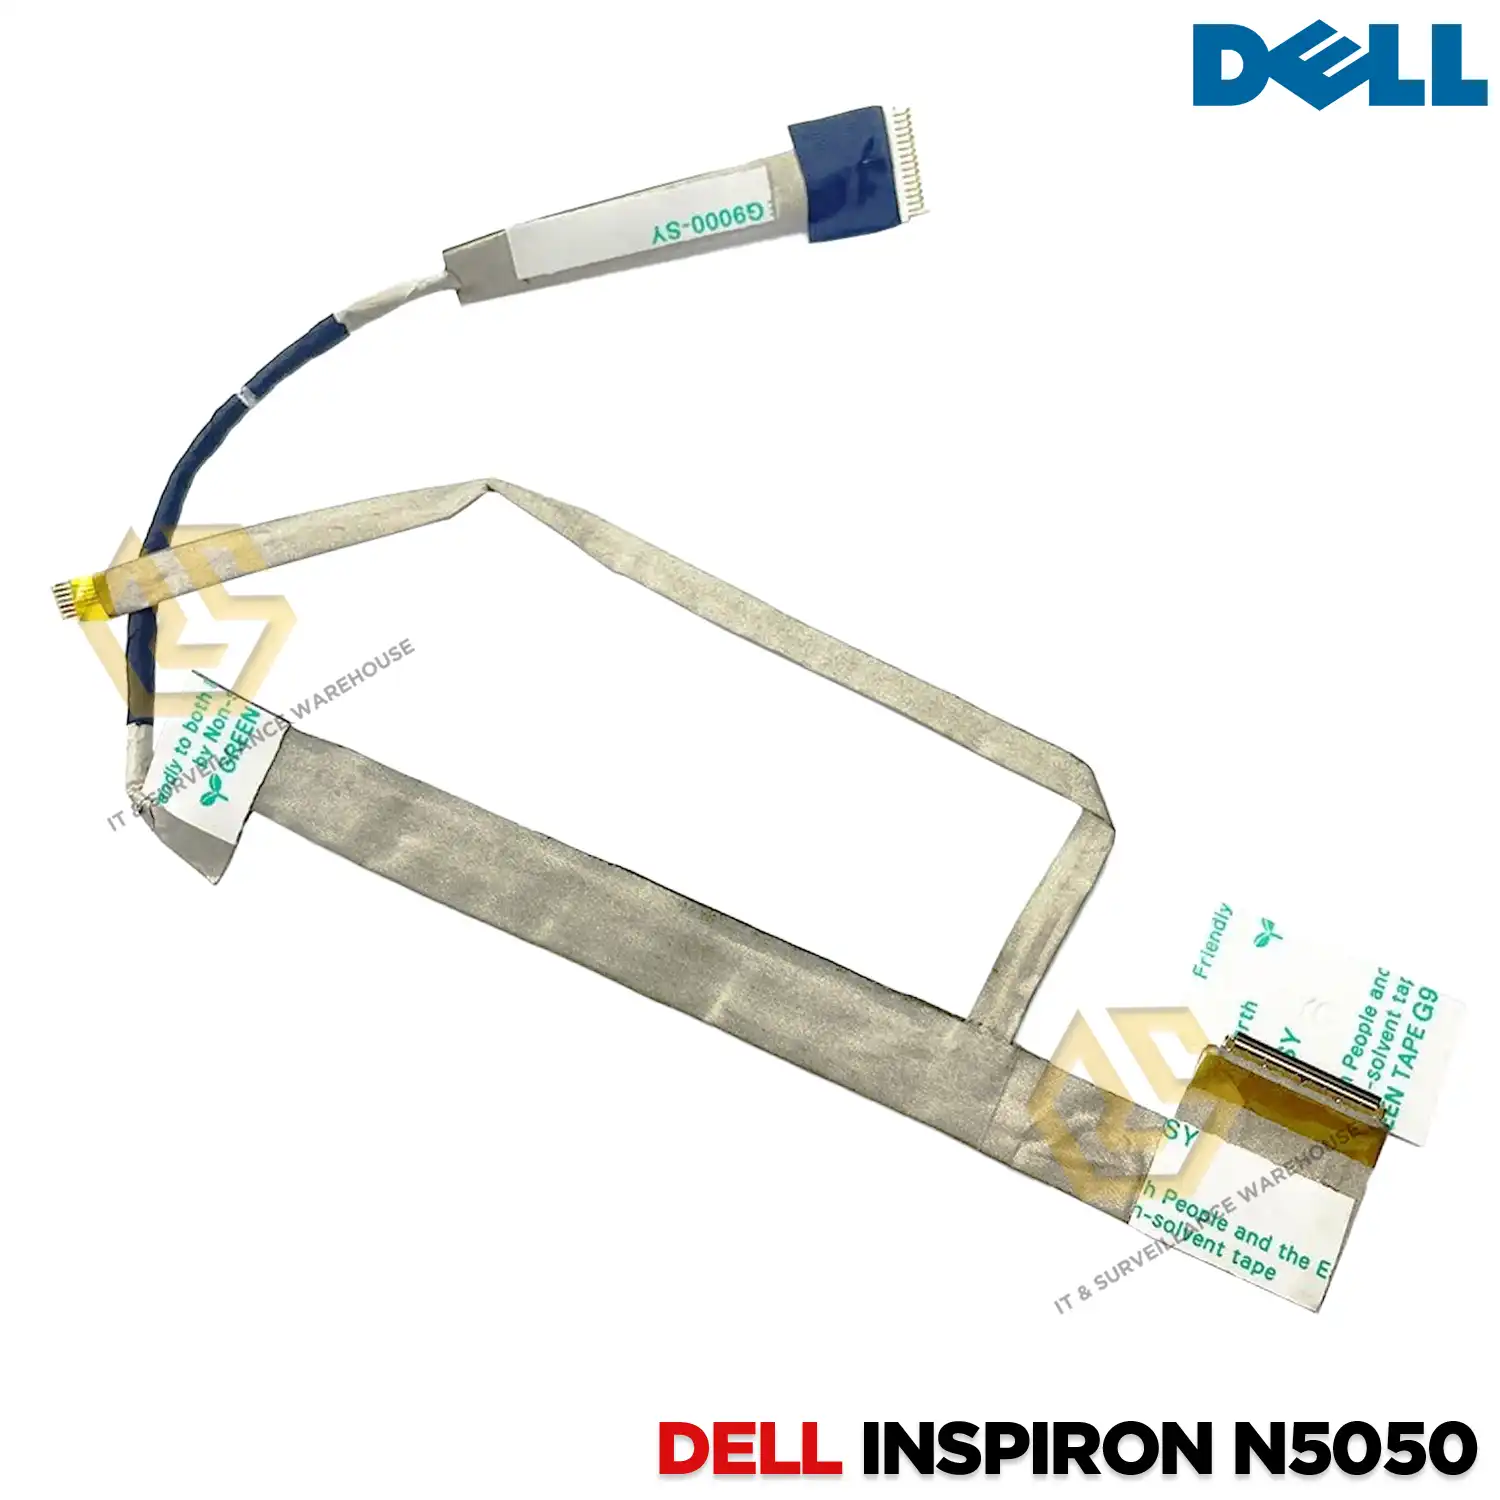 LAPTOP DISPLAY CABLE FOR DELL INSPIRON N5050 | 15R-3520 | N5040 | 1540 | 1550